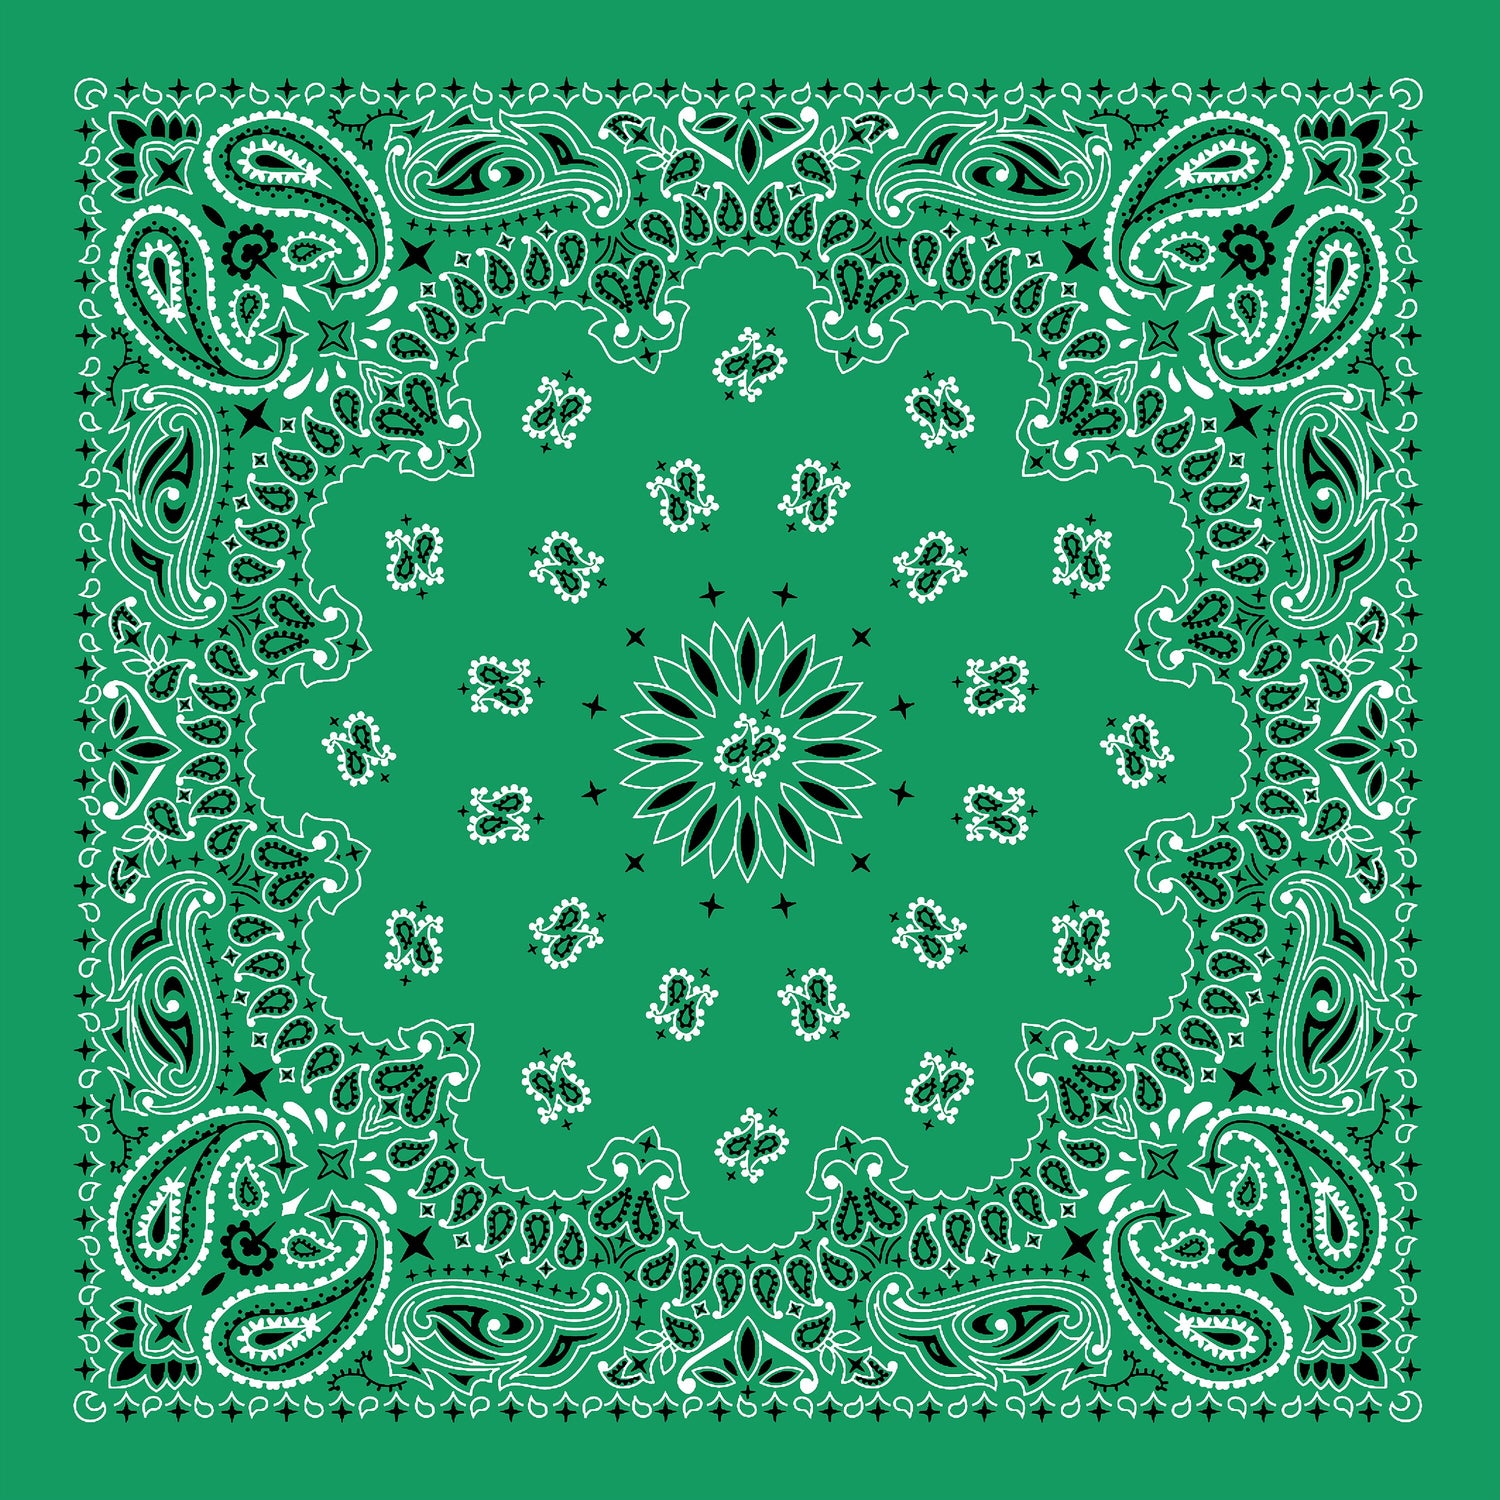 Green Paisley Bandana, Satin or Poplin with Traditional Pattern for a Head Wrap or Neck Scarf